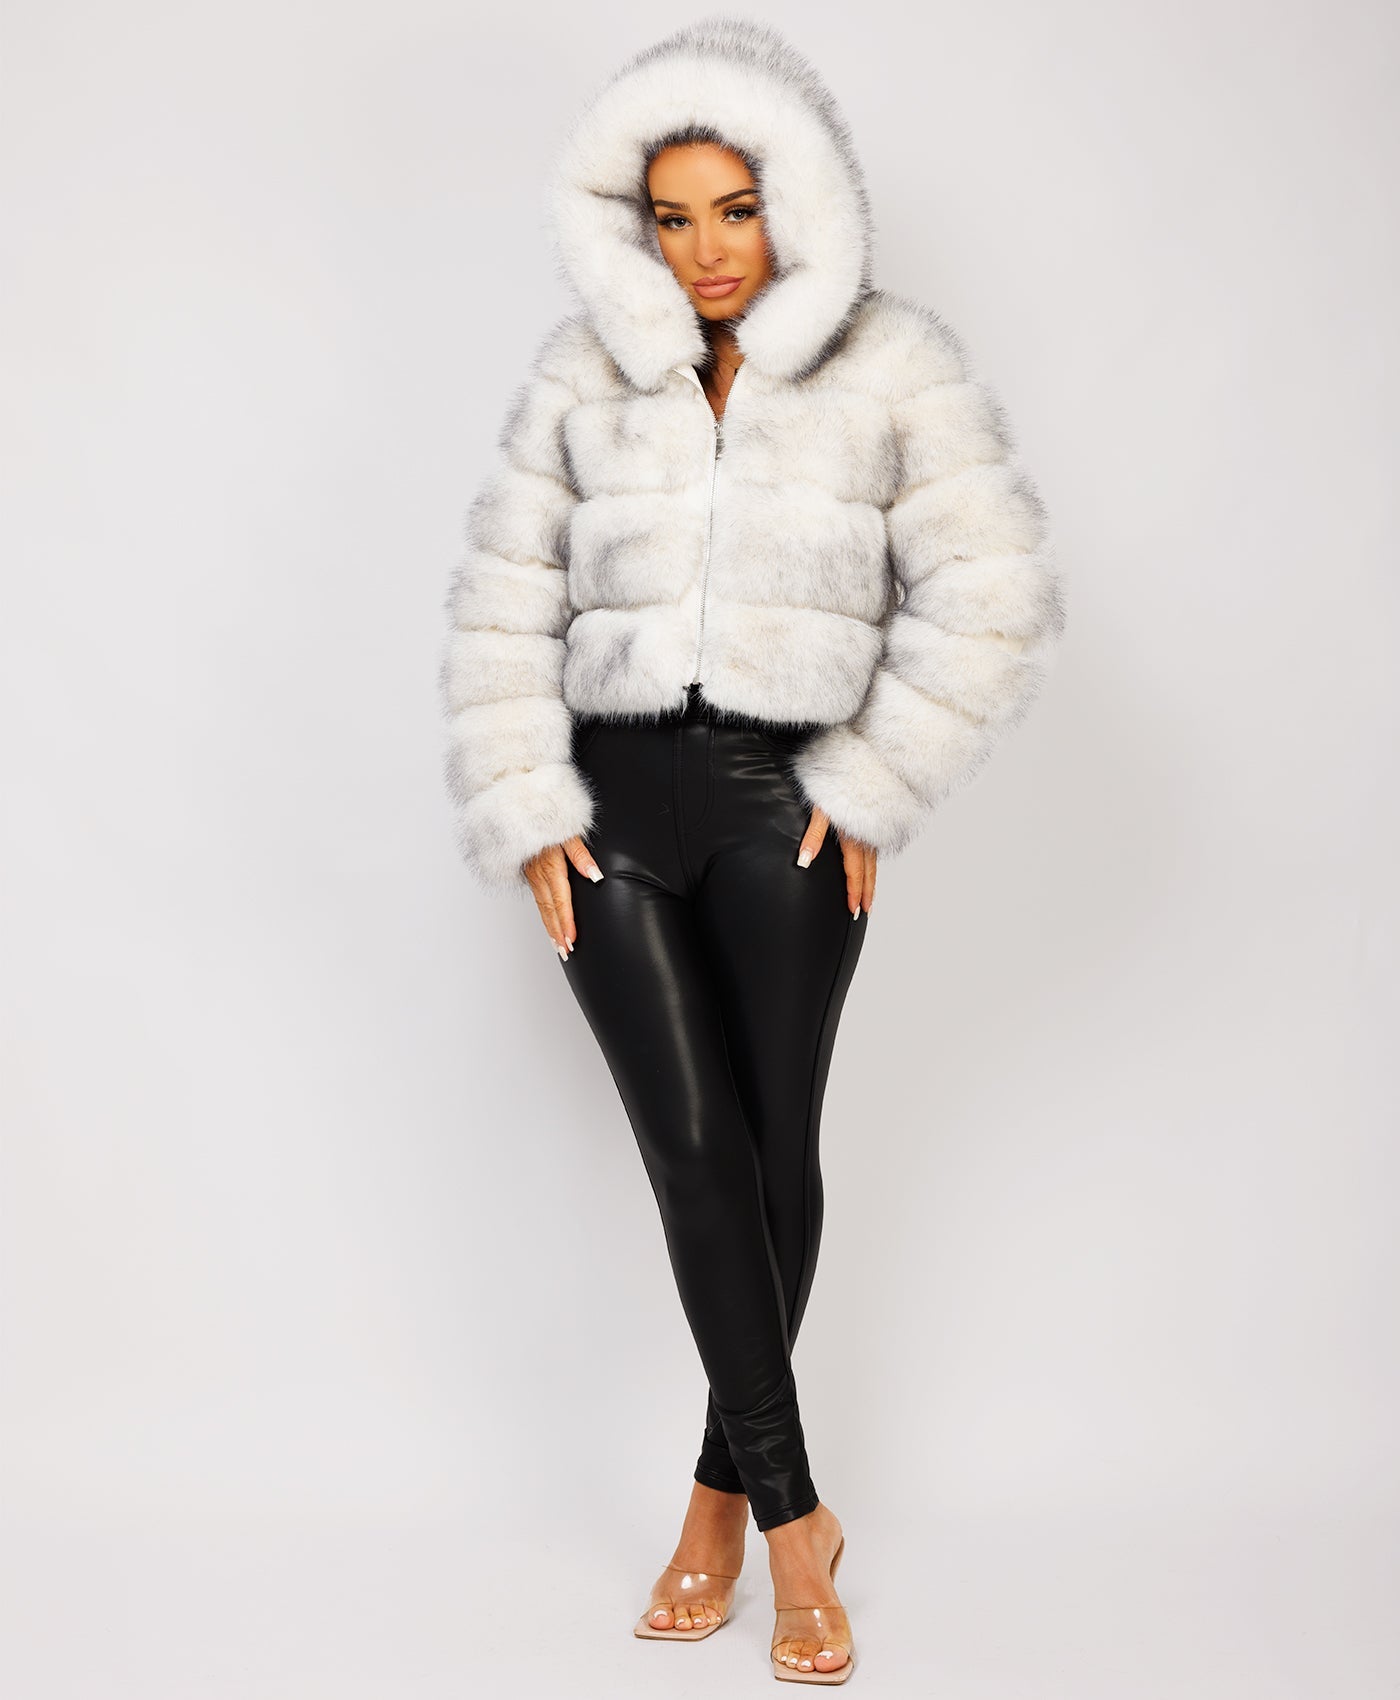 Snow-White-Premium-Hooded-Faux-Fur-Tiered-Jacket-Coat-1